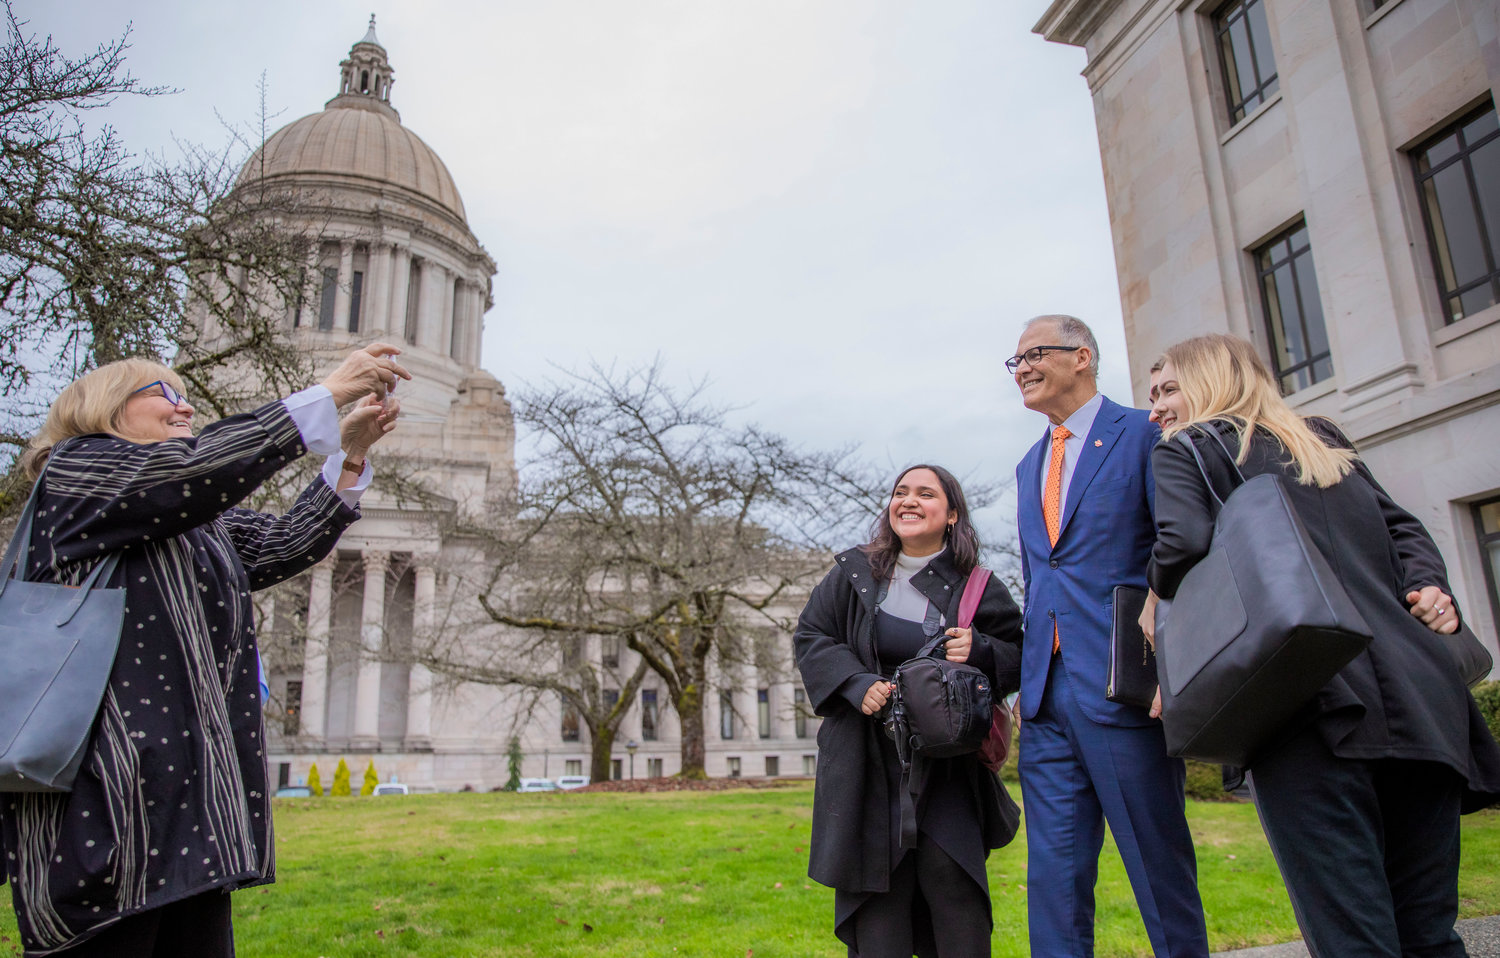 Trudi Inslee smiles while taking photos of Gov. Jay Inslee next to fans on Thursday, Jan. 5, outside the John A. Cherberg Building in Olympia.